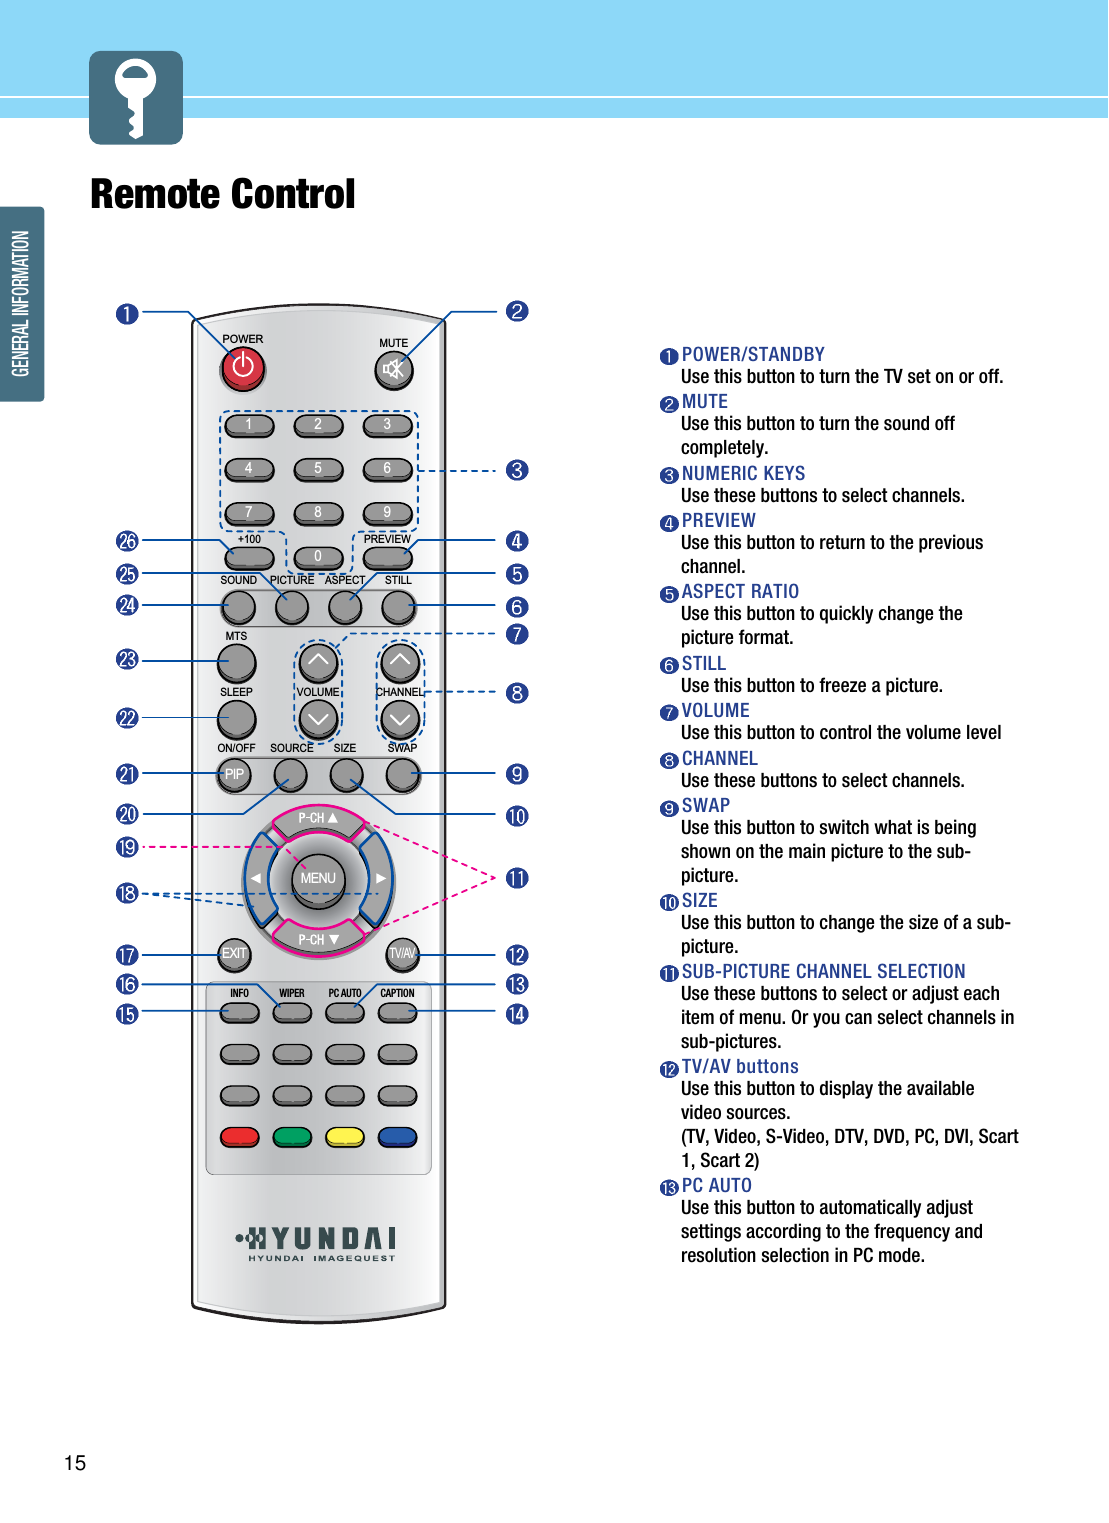 GENERAL INFORMATION15Remote ControlPOWER/STANDBYUse this button to turn the TV set on or off.MUTEUse this button to turn the sound offcompletely.NUMERIC KEYSUse these buttons to select channels.PREVIEWUse this button to return to the previouschannel. ASPECT RATIOUse this button to quickly change thepicture format.STILLUse this button to freeze a picture.VOLUMEUse this button to control the volume levelCHANNELUse these buttons to select channels.SWAP Use this button to switch what is beingshown on the main picture to the sub-picture.SIZEUse this button to change the size of a sub-picture.SUB-PICTURE CHANNEL SELECTIONUse these buttons to select or adjust eachitem of menu. Or you can select channels insub-pictures.TV/AV buttonsUse this button to display the availablevideo sources.(TV, Video, S-Video, DTV, DVD, PC, DVI, Scart1, Scart 2)PC AUTOUse this button to automatically adjustsettings according to the frequency andresolution selection in PC mode.1 203475869PIPMENUTV/AVEXITMUTEPREVIEW+100SOUNDMTSVOLUMESLEEPON/OFFINFO WIPER PC AUTO CAPTIONSOURCE SIZE SWAPCHANNELPICTURE ASPECT STILLPOWER